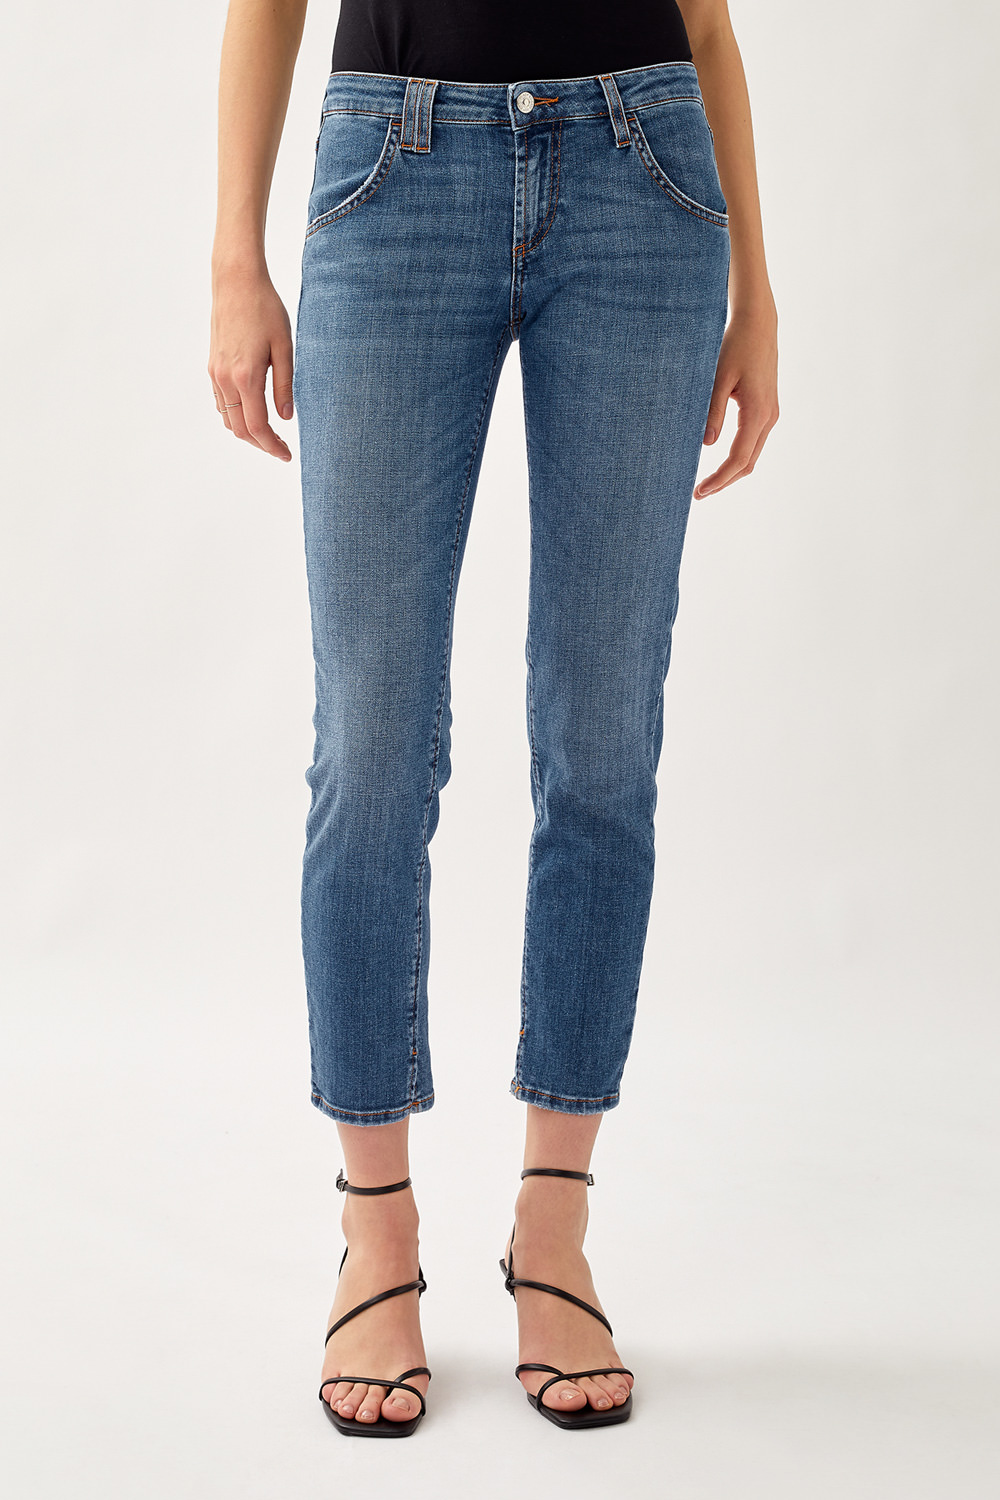 JEANS ROY ROGERS SKINNY SUPER STRETCH